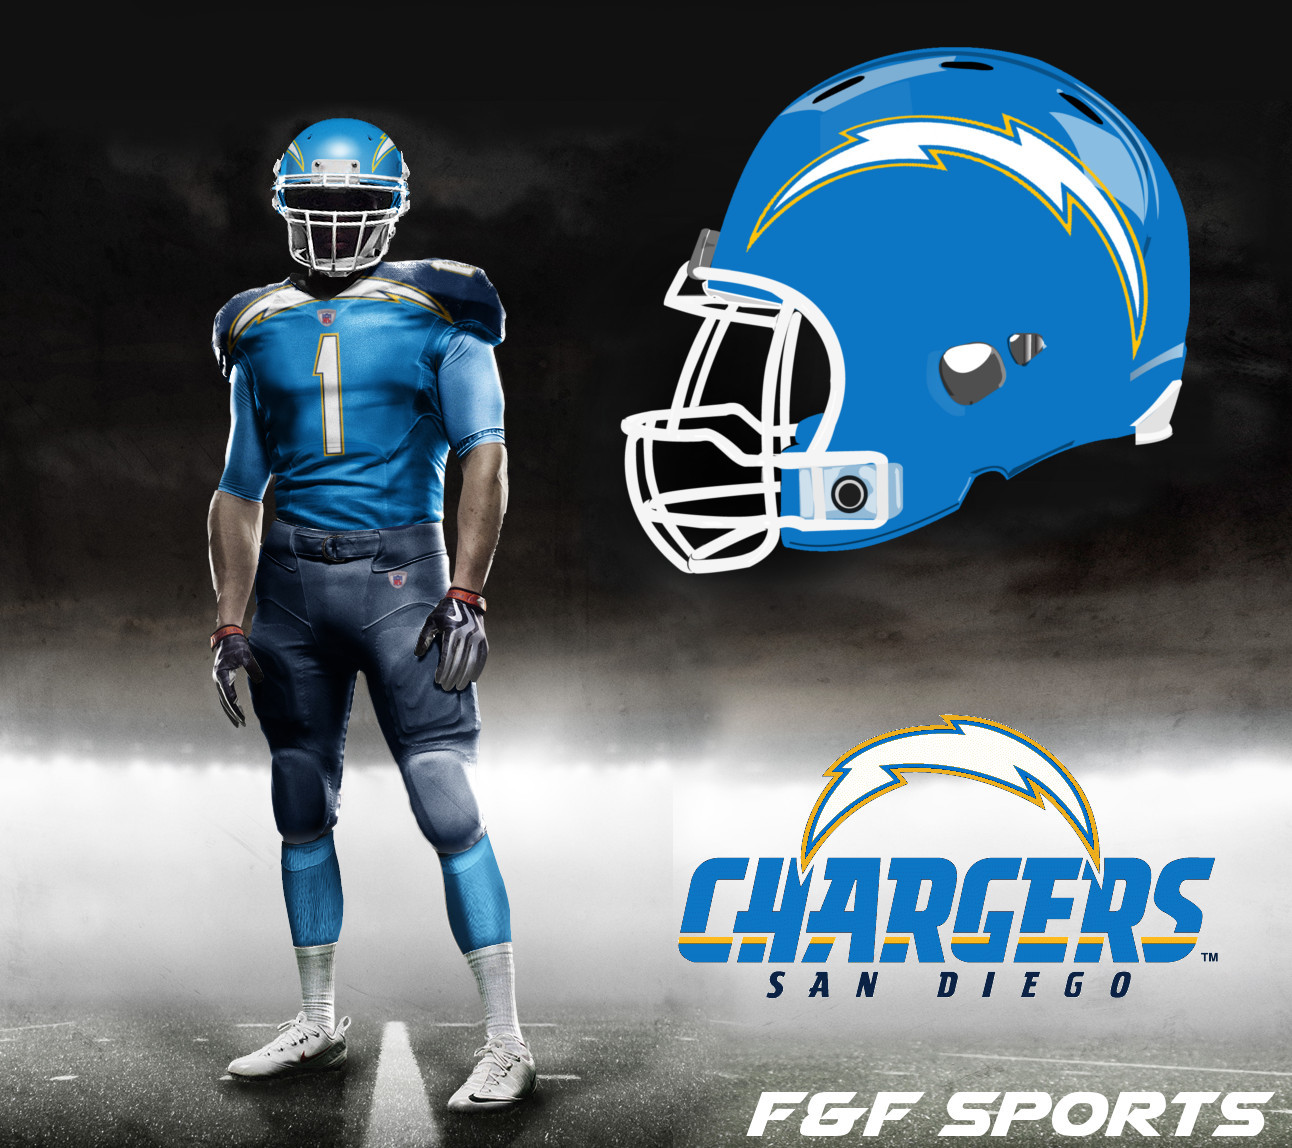 chargers-concept-home-2.jpg